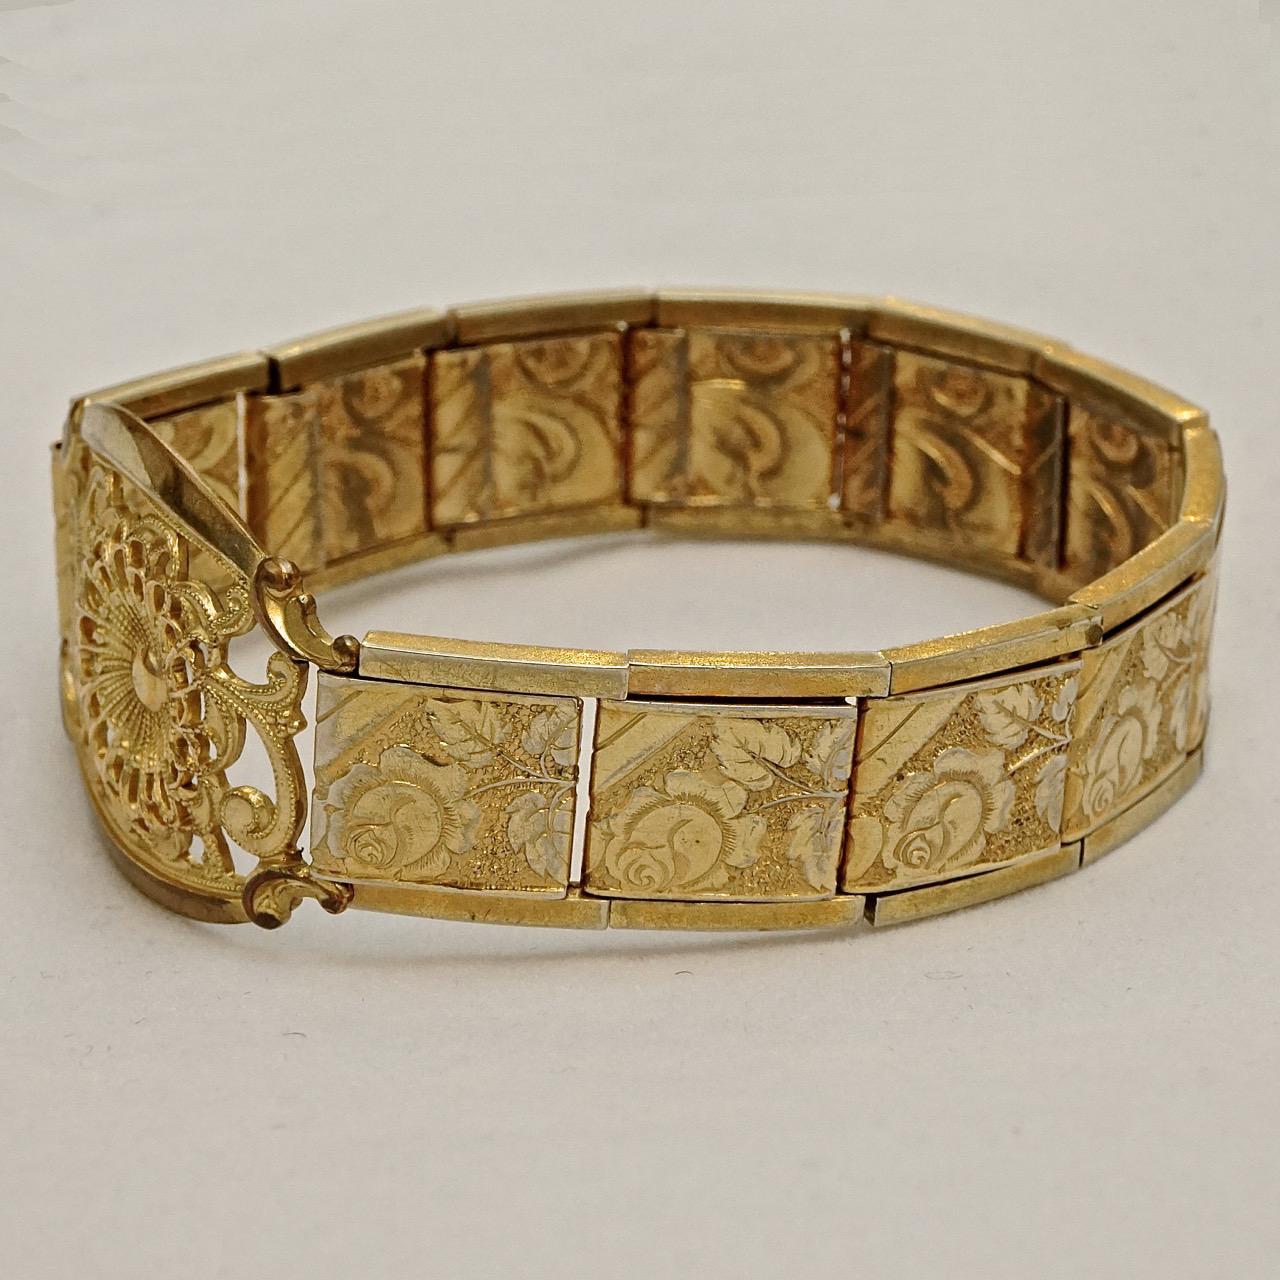 Gold Plated Engraved Flower Expansion Link Bracelet In Good Condition For Sale In London, GB